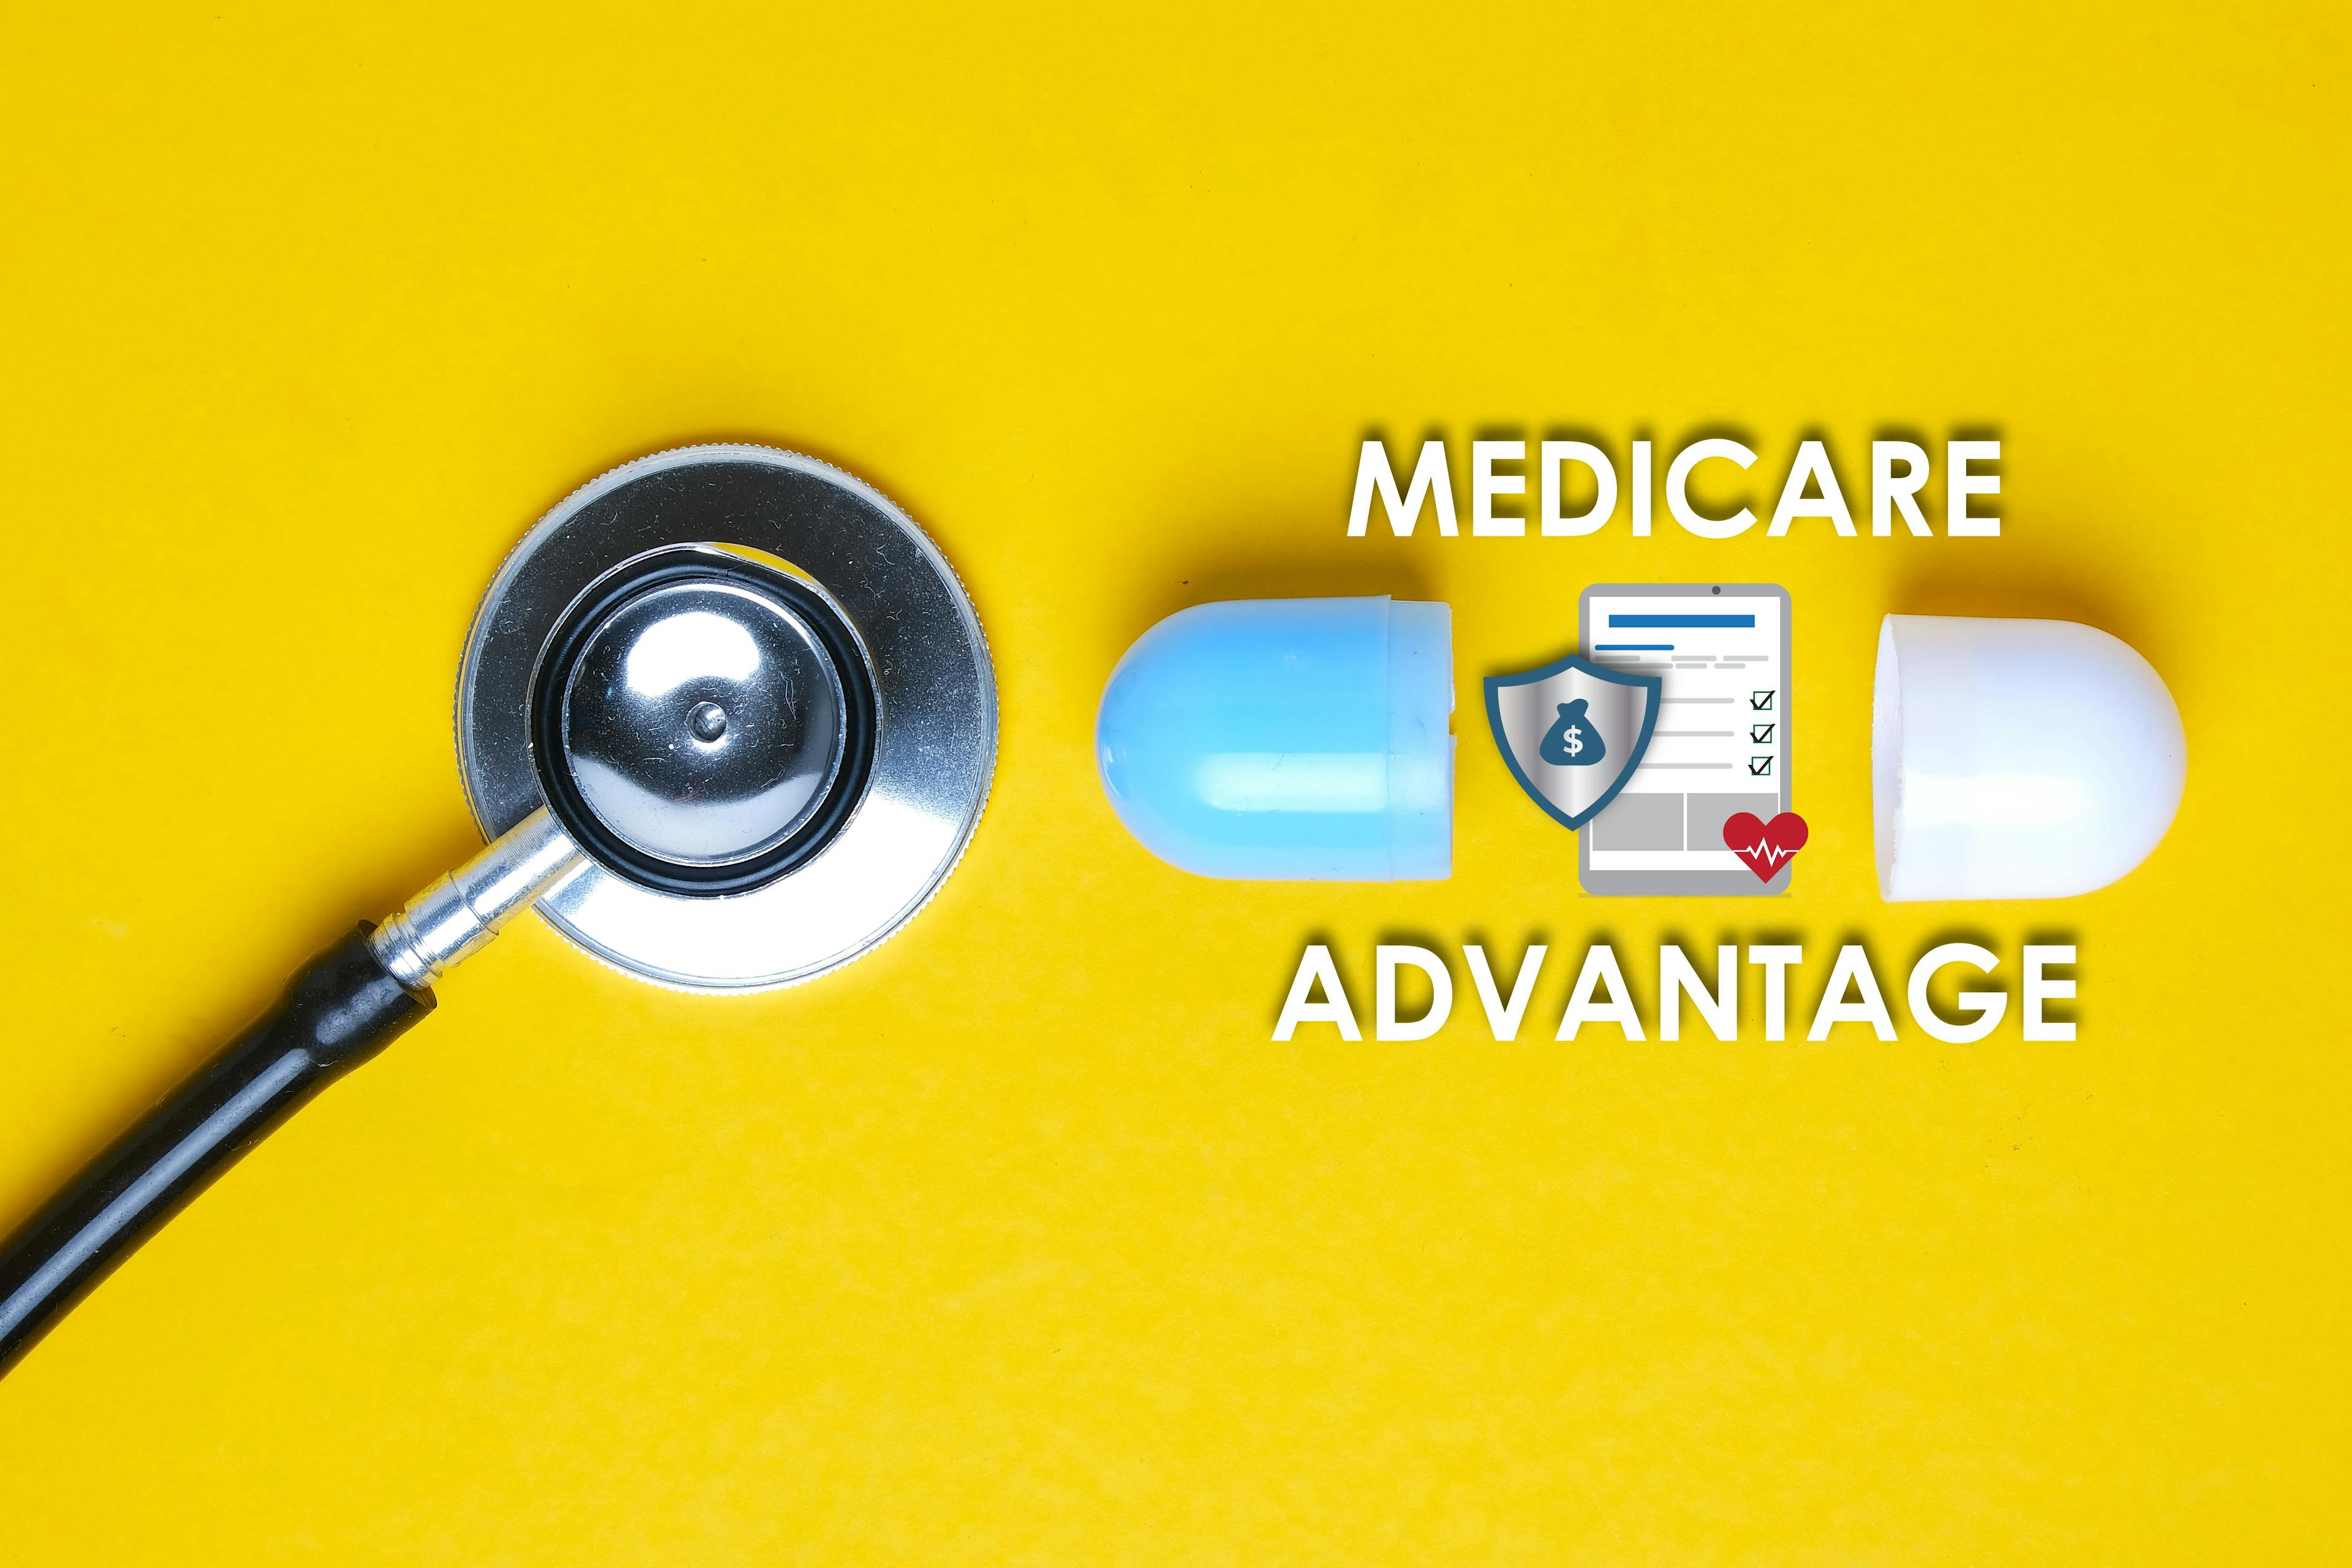 A stethoscope next to a Medicare Advantage graphic on a yellow background.